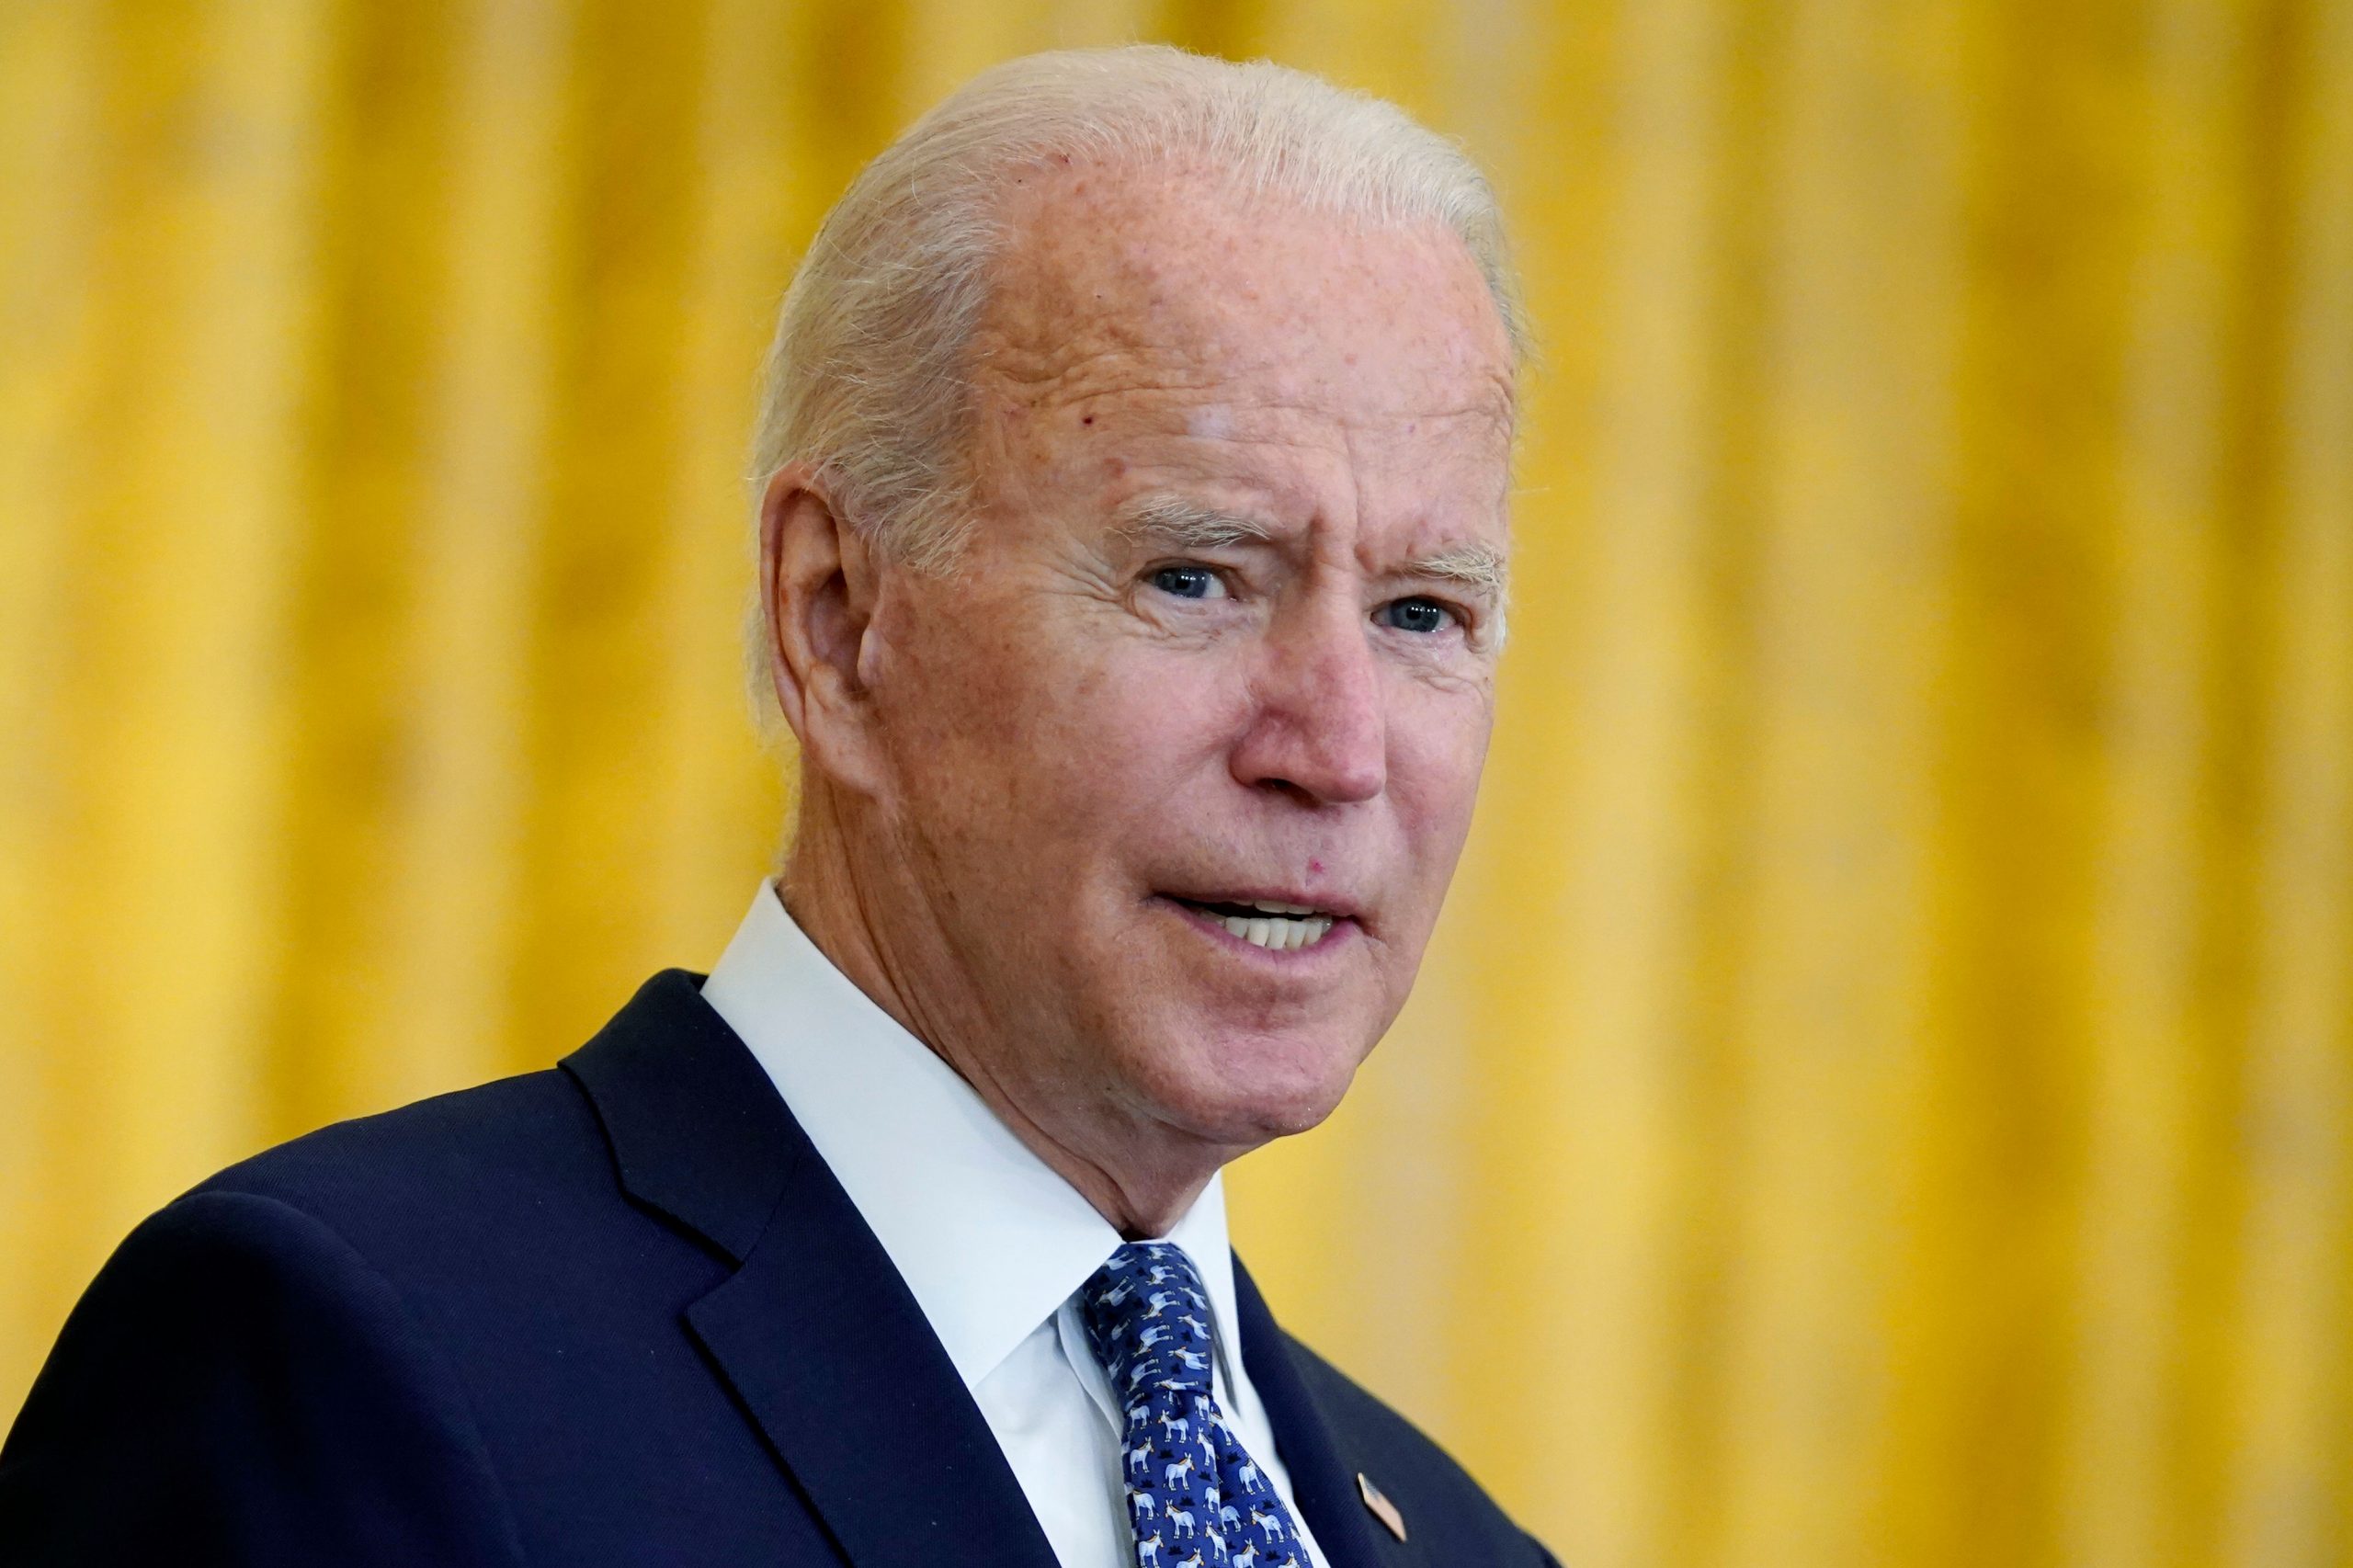 Biden credits Trump for COVID vaccines, says they agree on booster shots